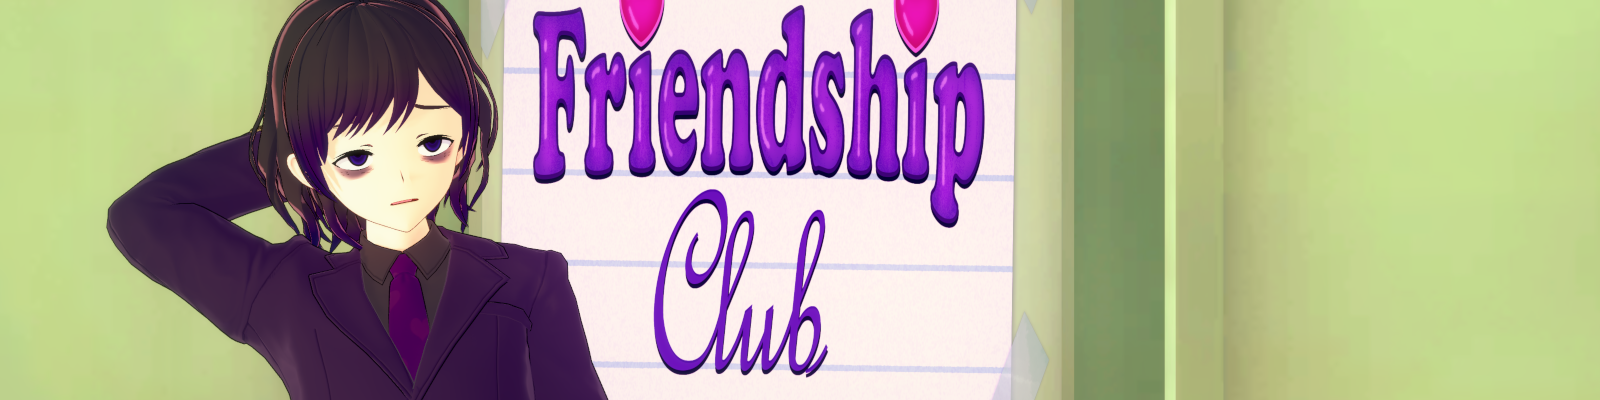 Welcome to The Friendship Club1.png